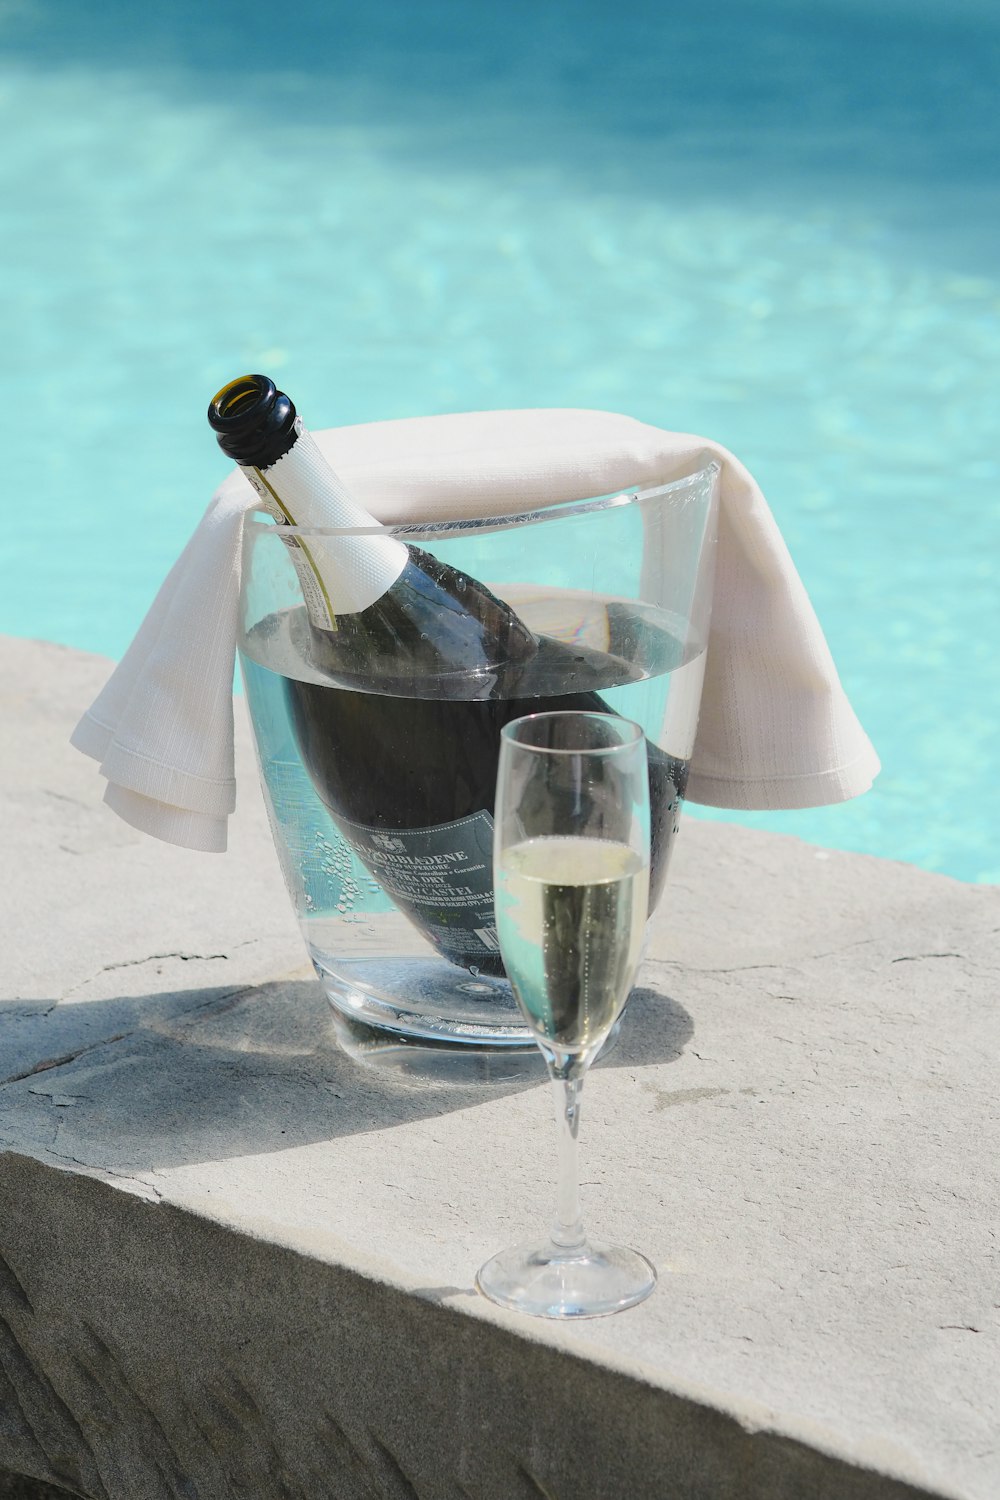 a bottle of wine and a glass of wine on a ledge near a pool